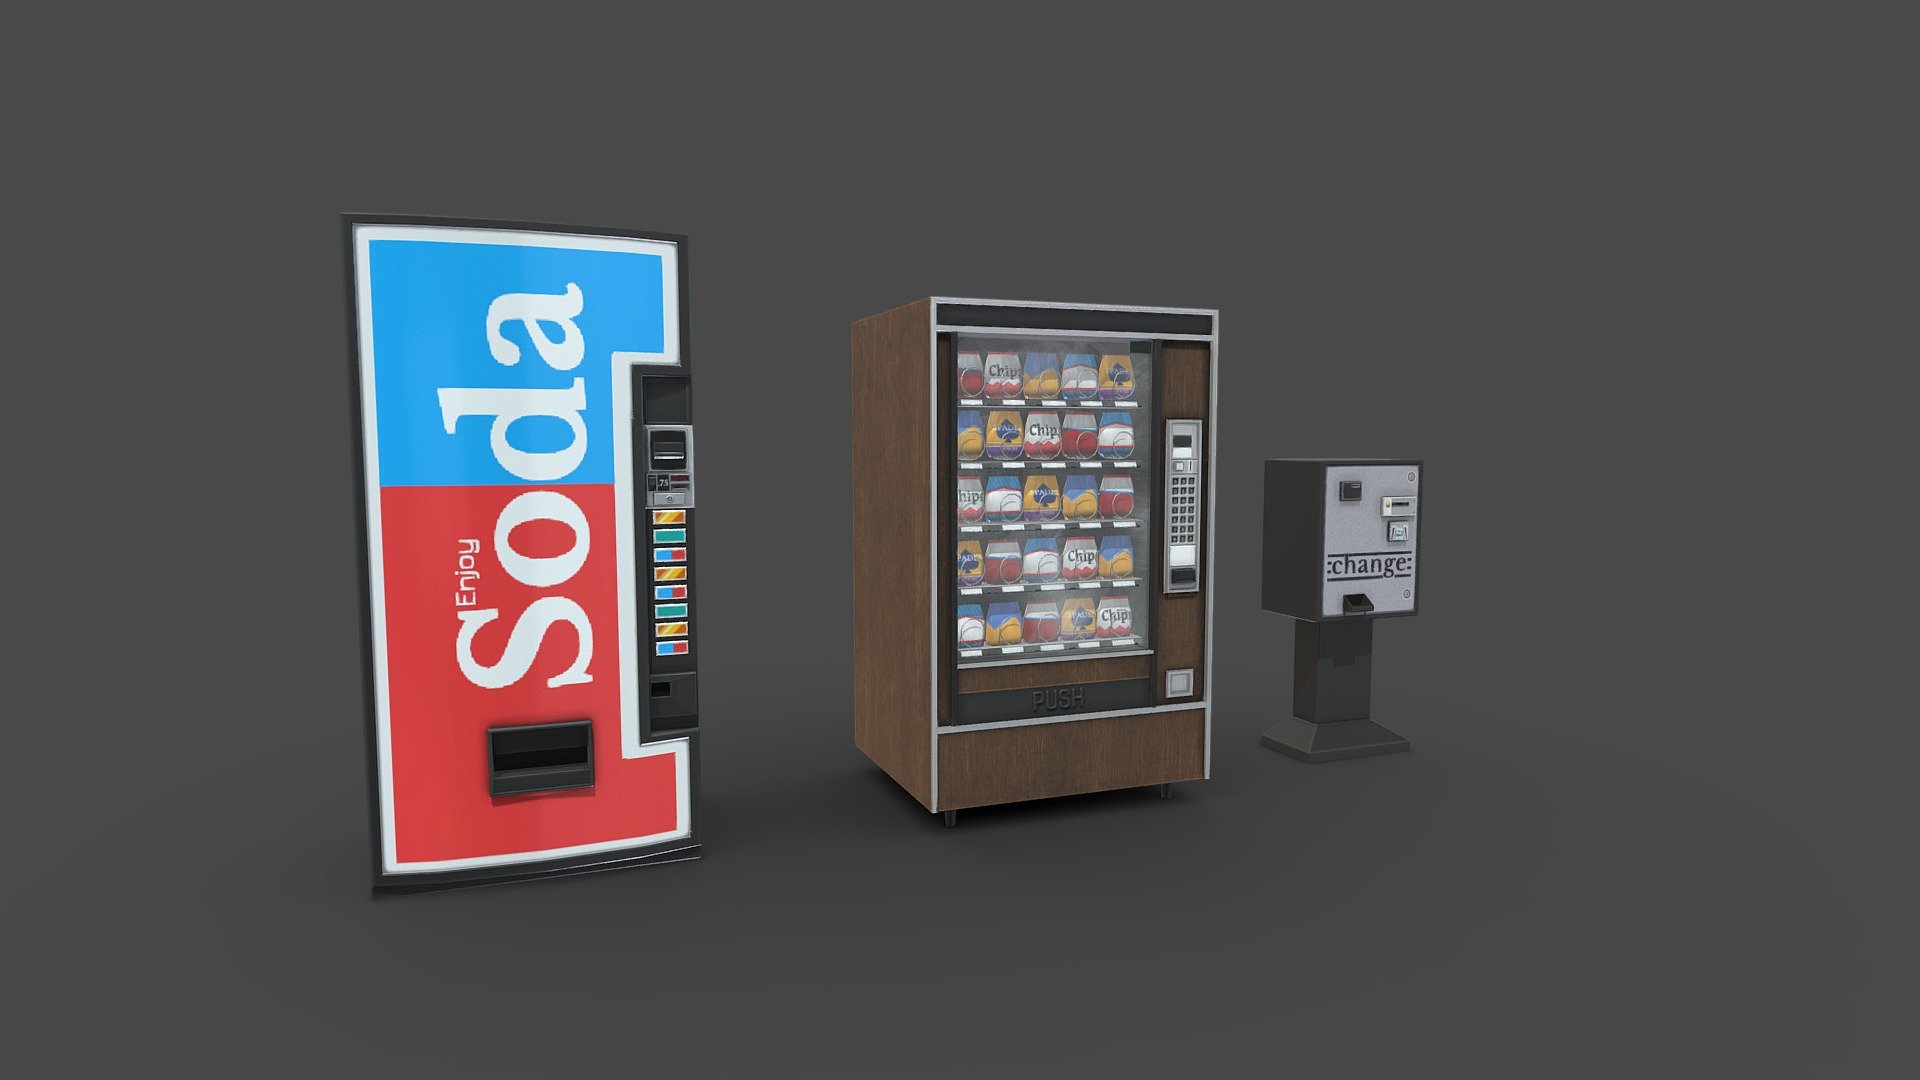 Series of common vending machines, based on those from the 90s-early 2000s.

Modeled in Autodesk Maya 2016, textured in Substance Painter 2019.3.3 - 90s Vending Machines - 3D model by Evan Hiltz (@evan.hiltz) 3d model